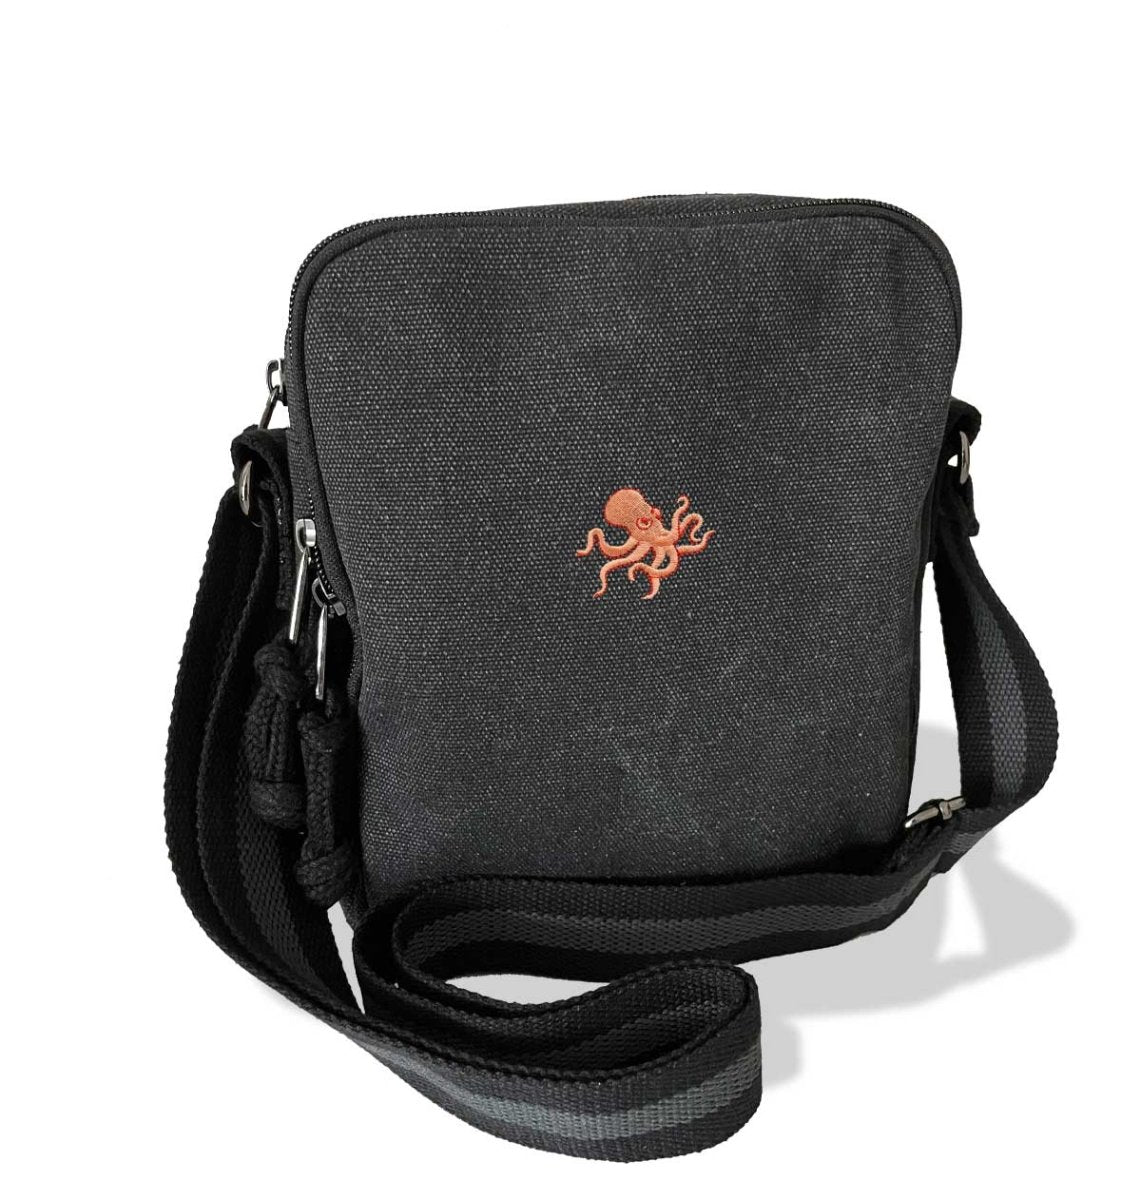 Octopus Vintage Canvas Cross-body Hand Bag - Octopus Embroidered Animal Lover Gift, Vintage Black